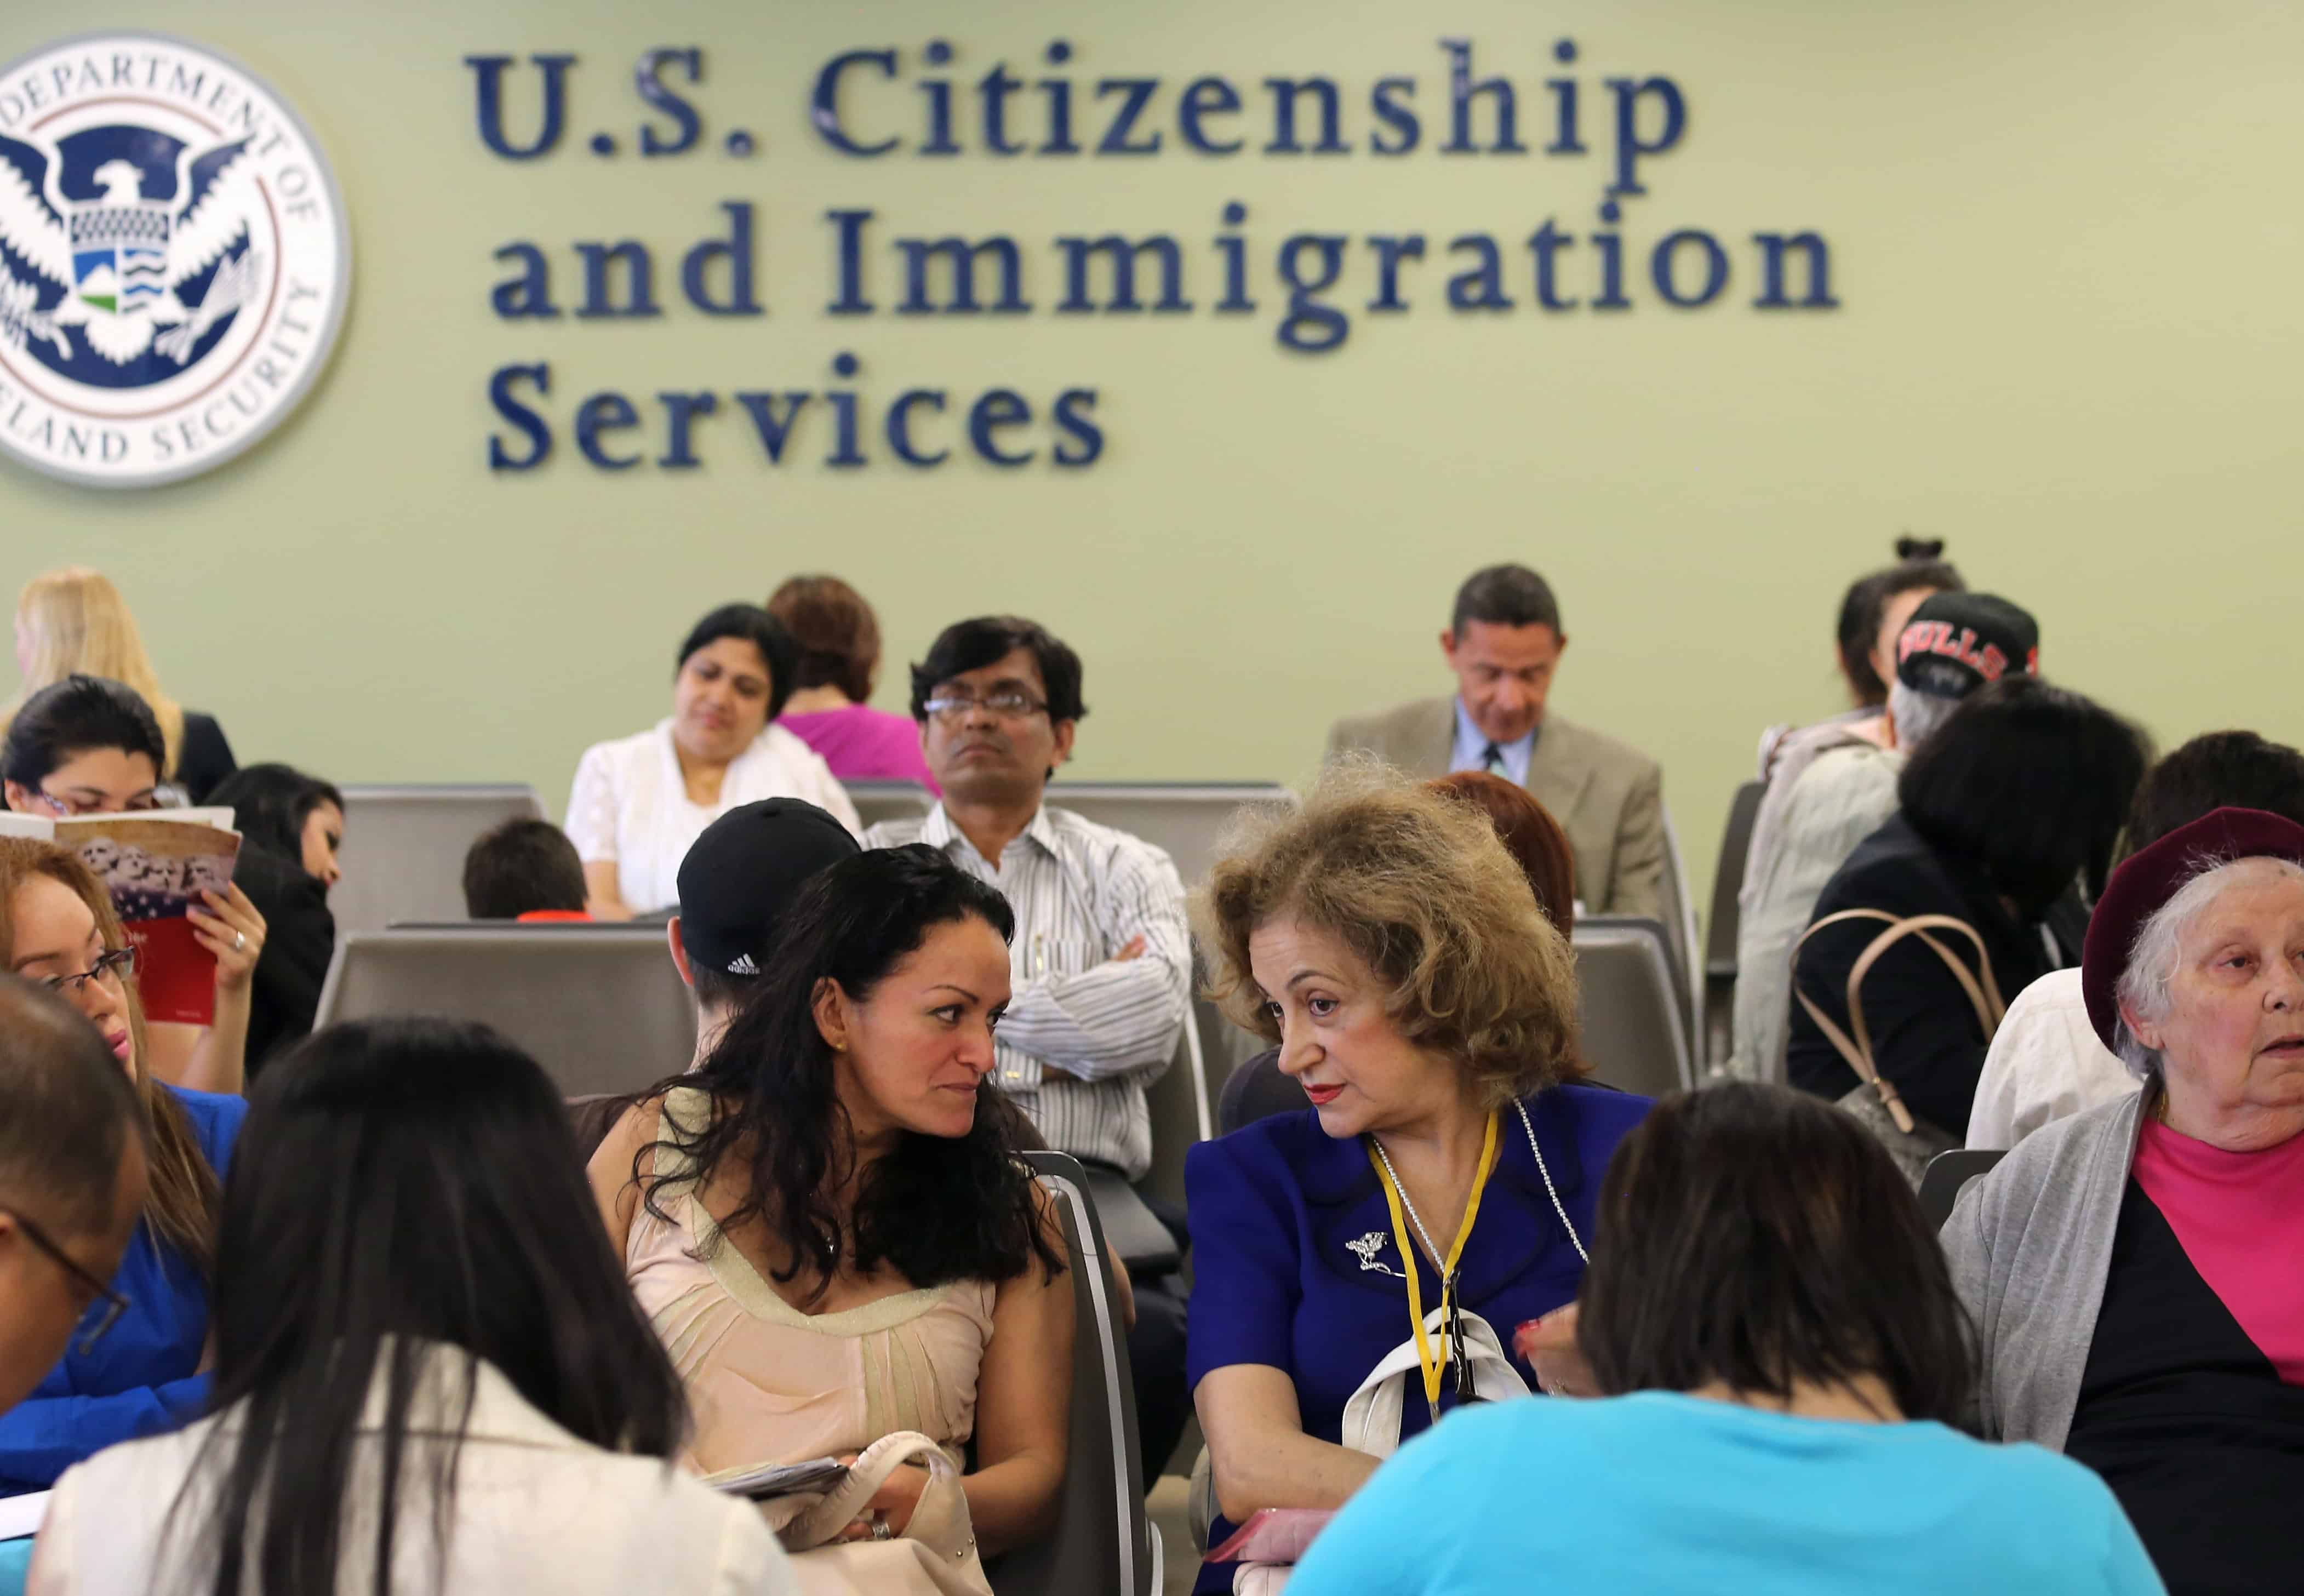 Immigrants await their turn for green card and citizenship interviews at the U.S. Citizenship and Immigration Services office in Queens, NY on May 30, 2013.